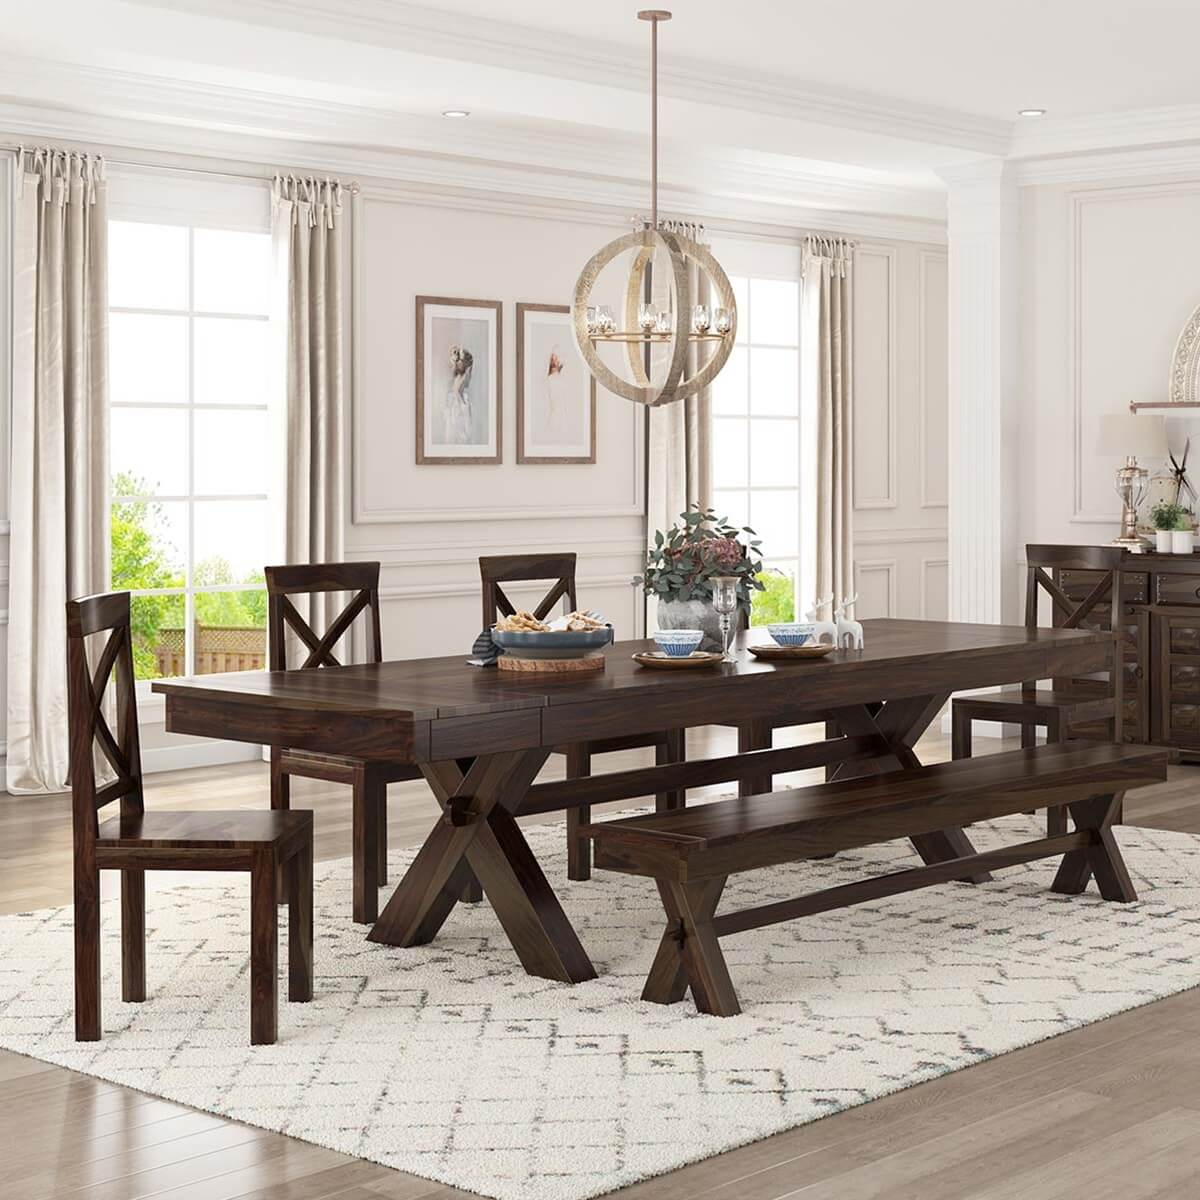 Westside Indoor Picnic Style Extendable Dining Table Bench Set with regard to sizing 1200 X 1200